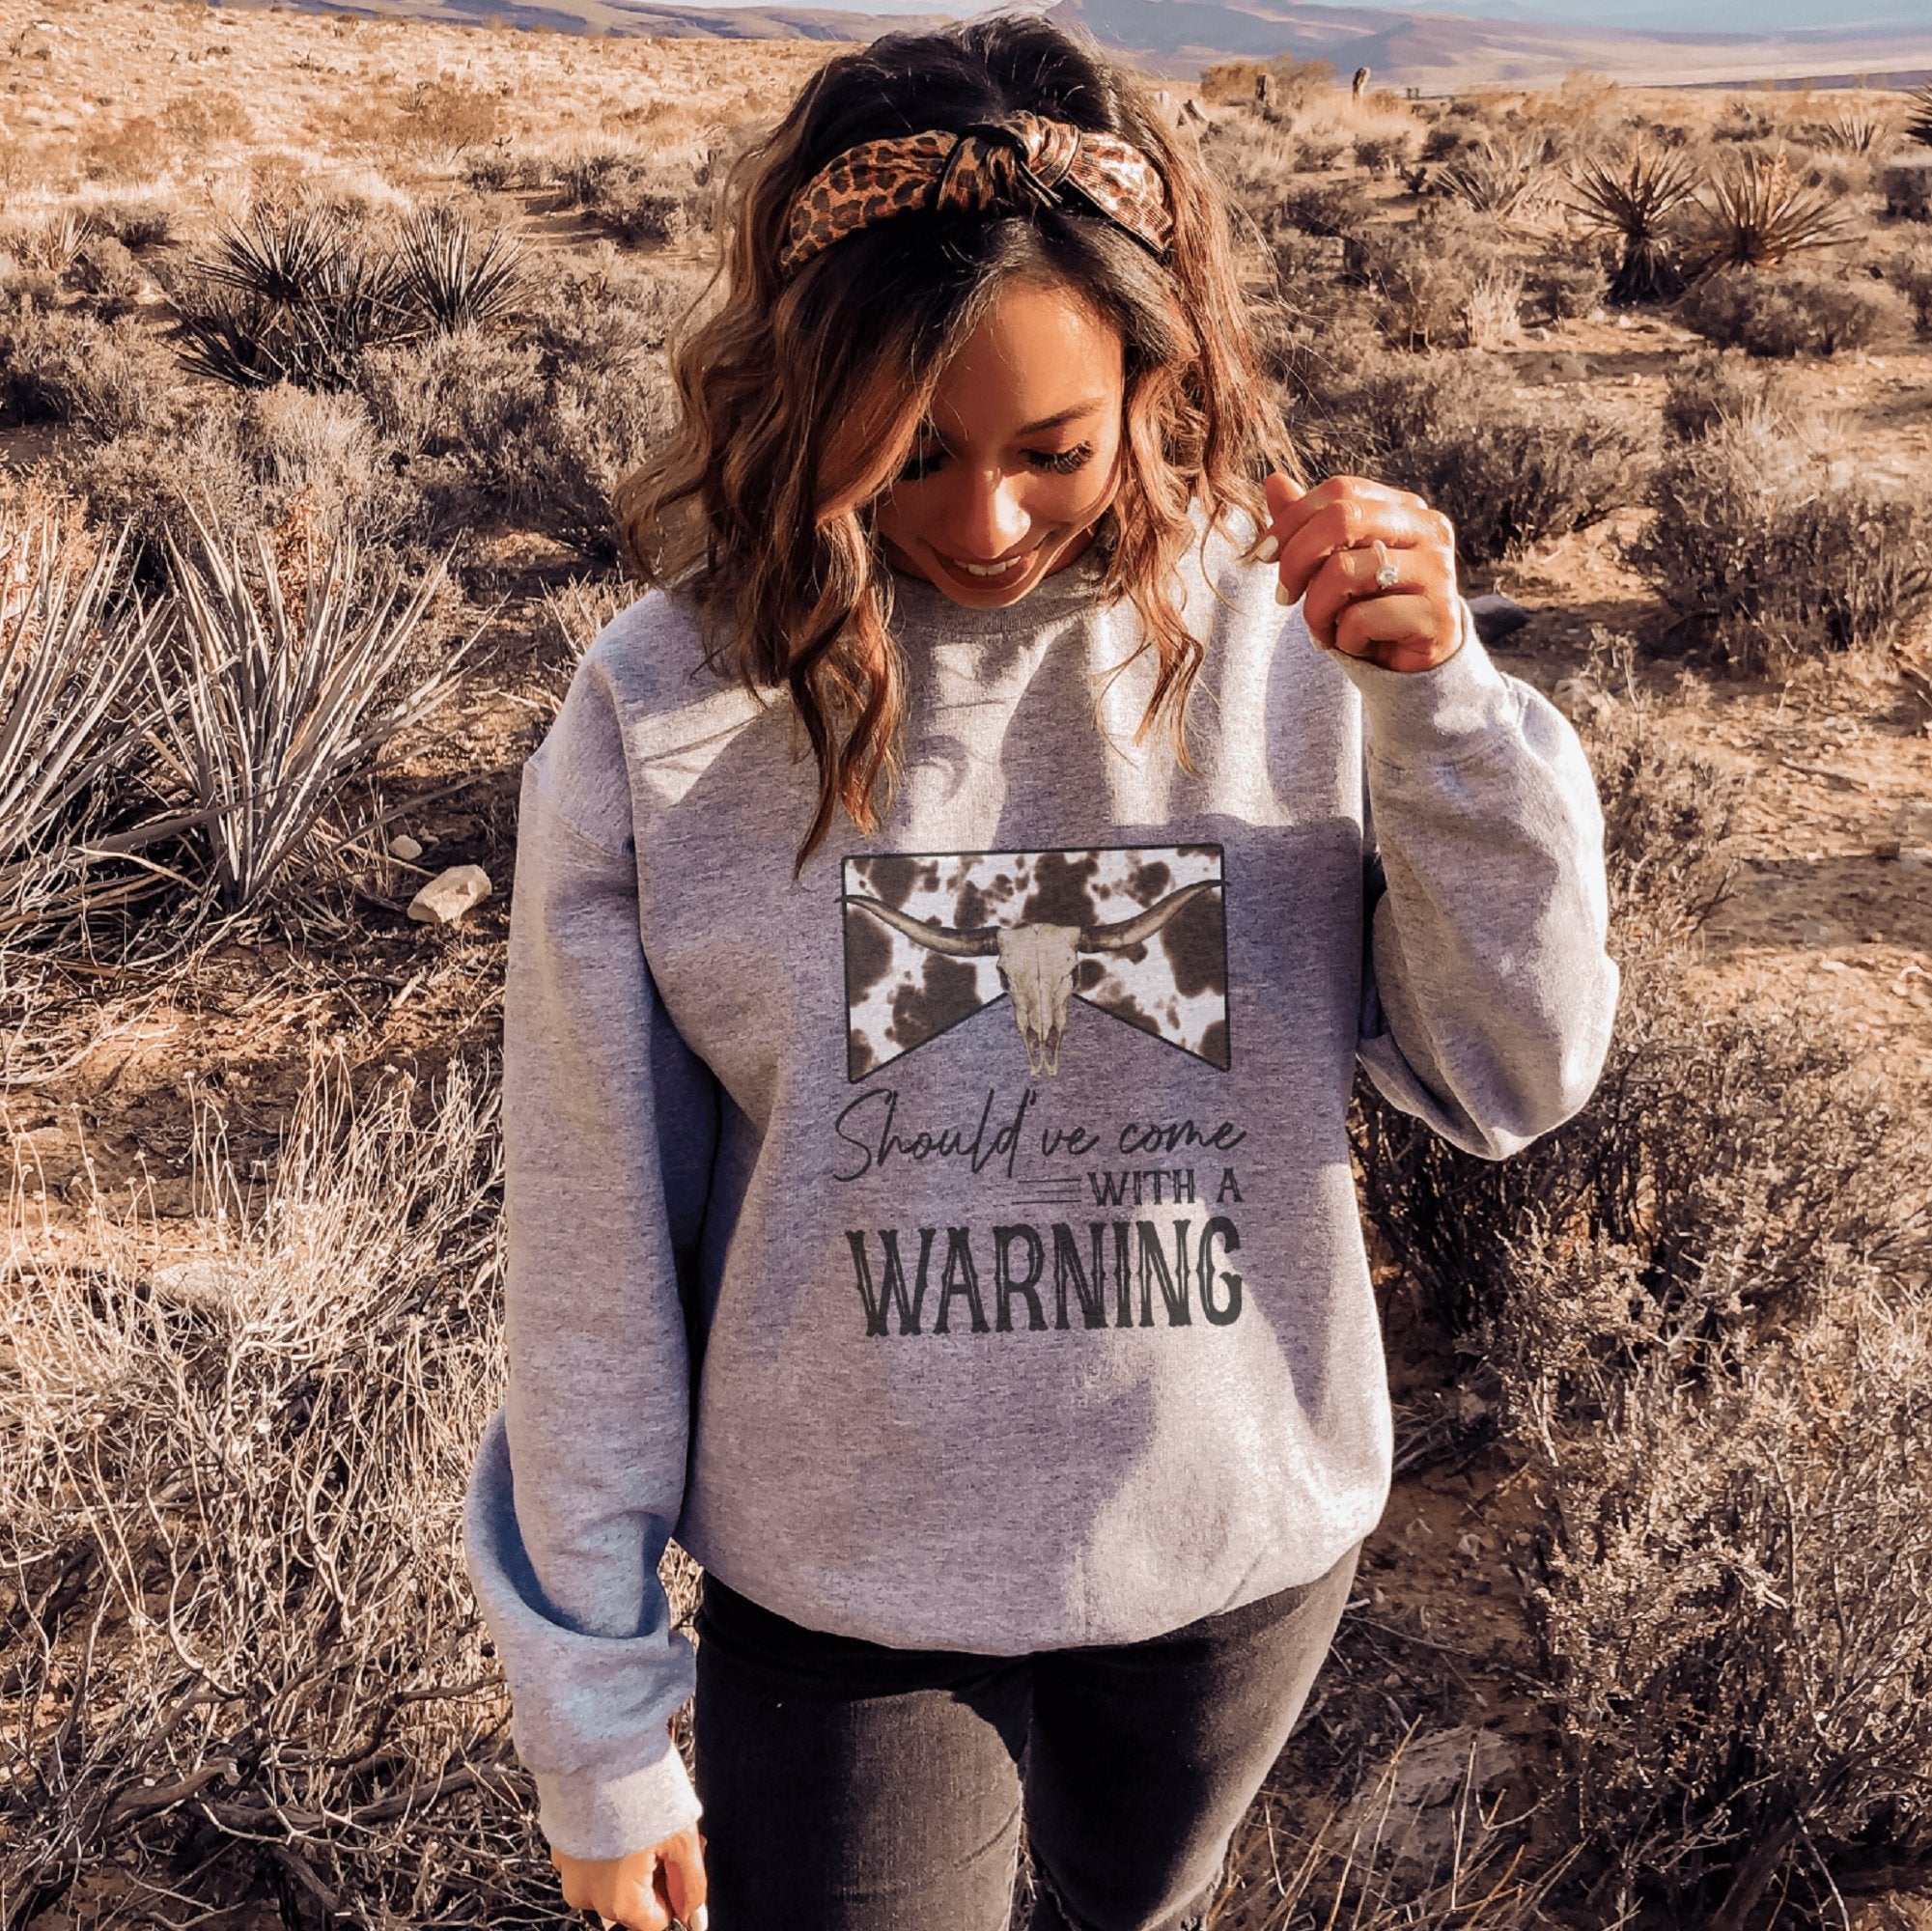 Should've Called with a Warning Crewneck Sweatshirt - Trendznmore